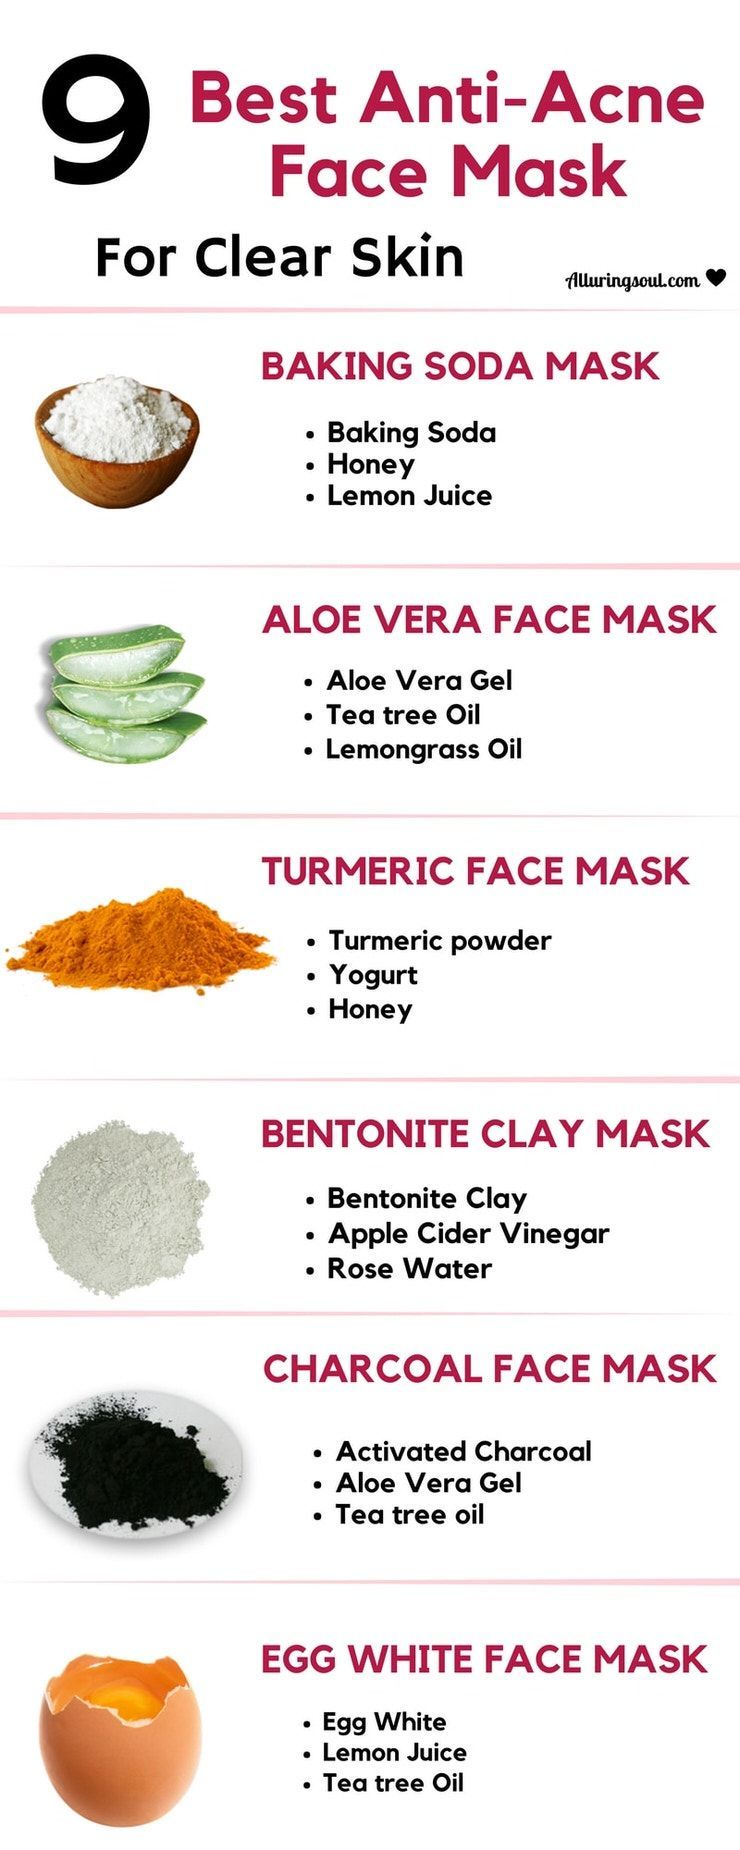 Best DIY Face Masks for Every Skin Type | OhMeOhMy Blog - Best DIY Face Masks for Every Skin Type | OhMeOhMy Blog -   12 best diy Face Mask ideas